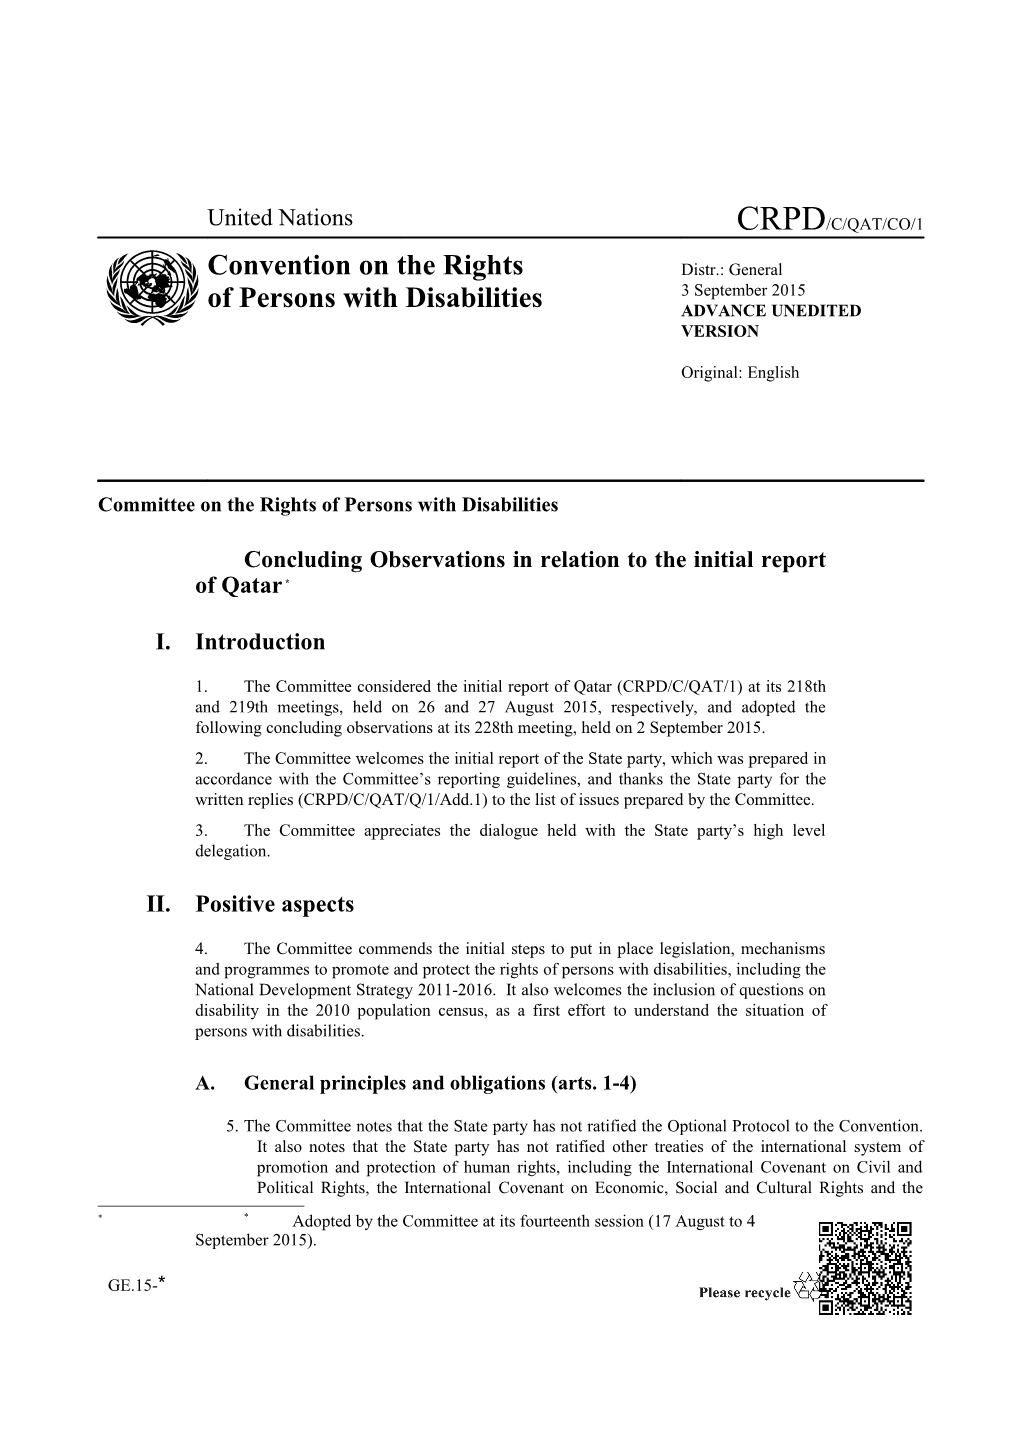 Committee on the Rights of Persons with Disabilities s7